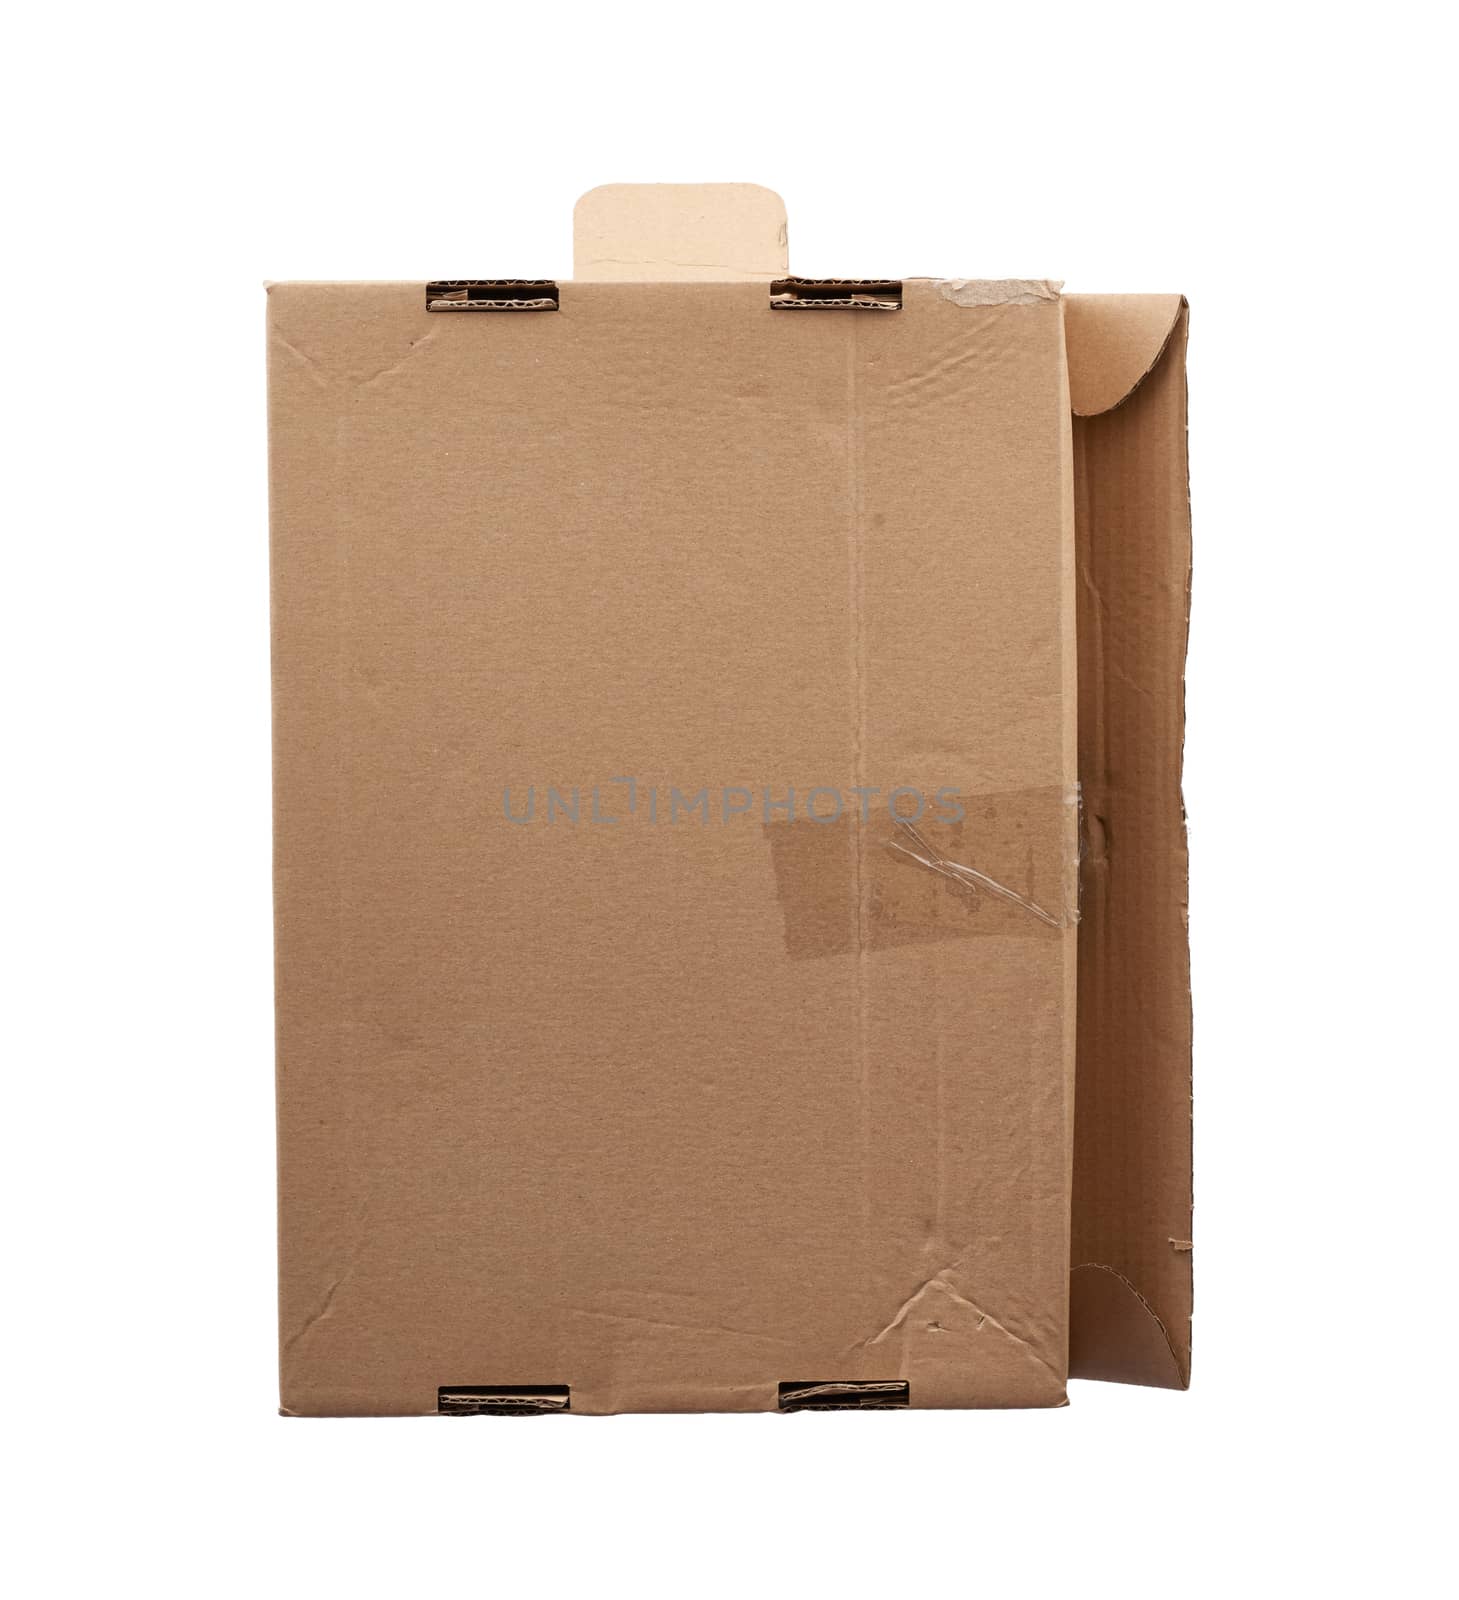 closed brown rectangular cardboard box for transporting goods isolated on white background. Packaging design